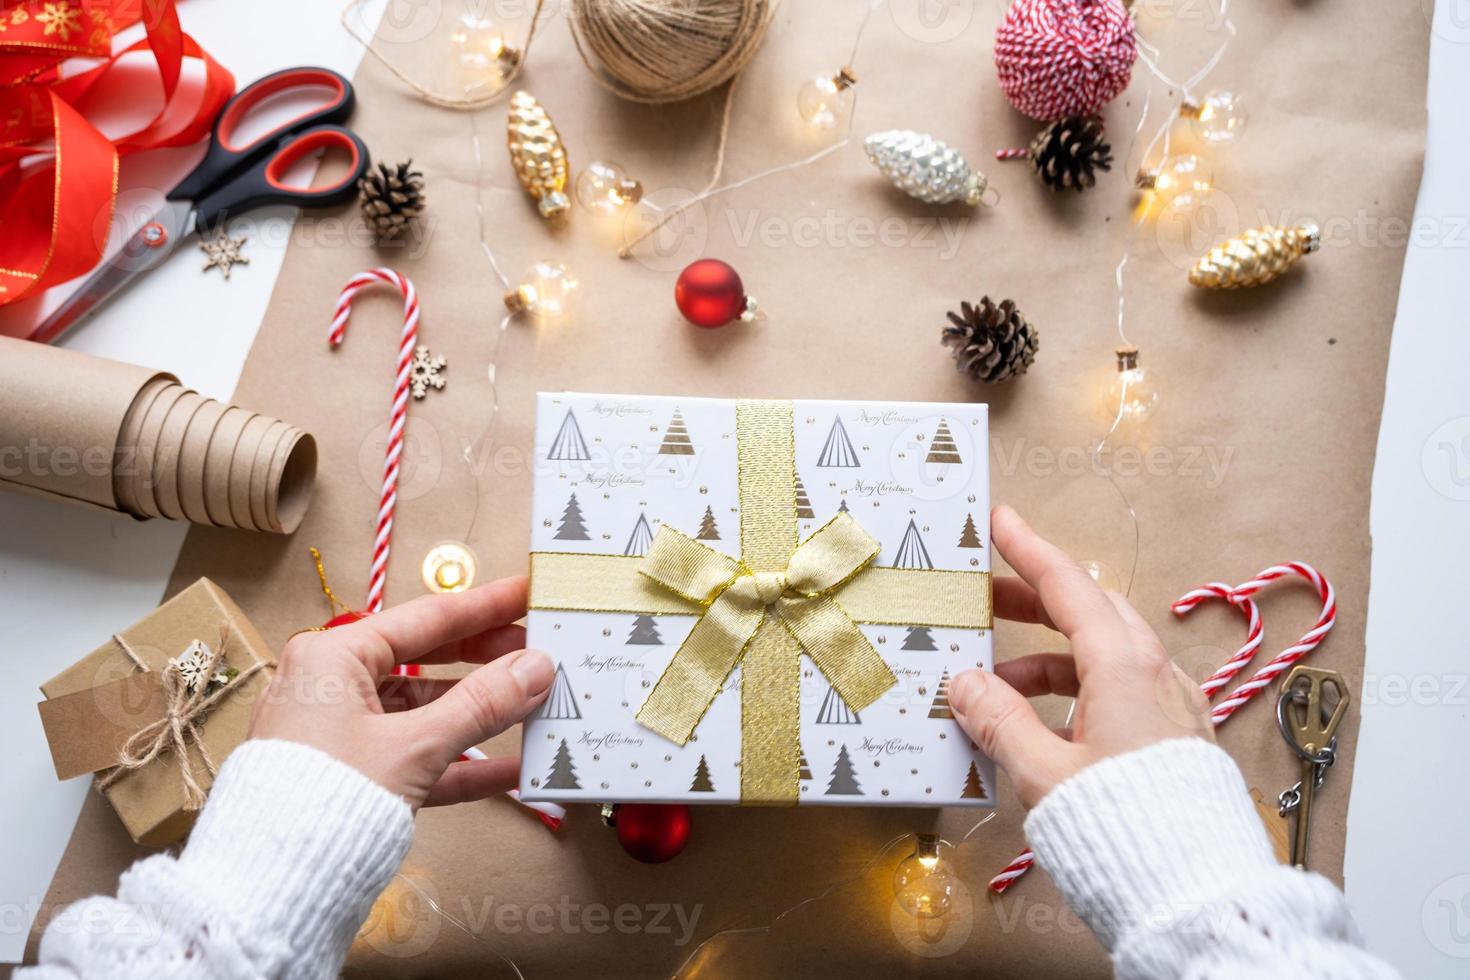 Pack a gift for Christmas and new year in kraft paper, cones, tape, scissors. Tags with mock up, natural decor, hand made, DIY. Festive mood. Flatlay, background photo